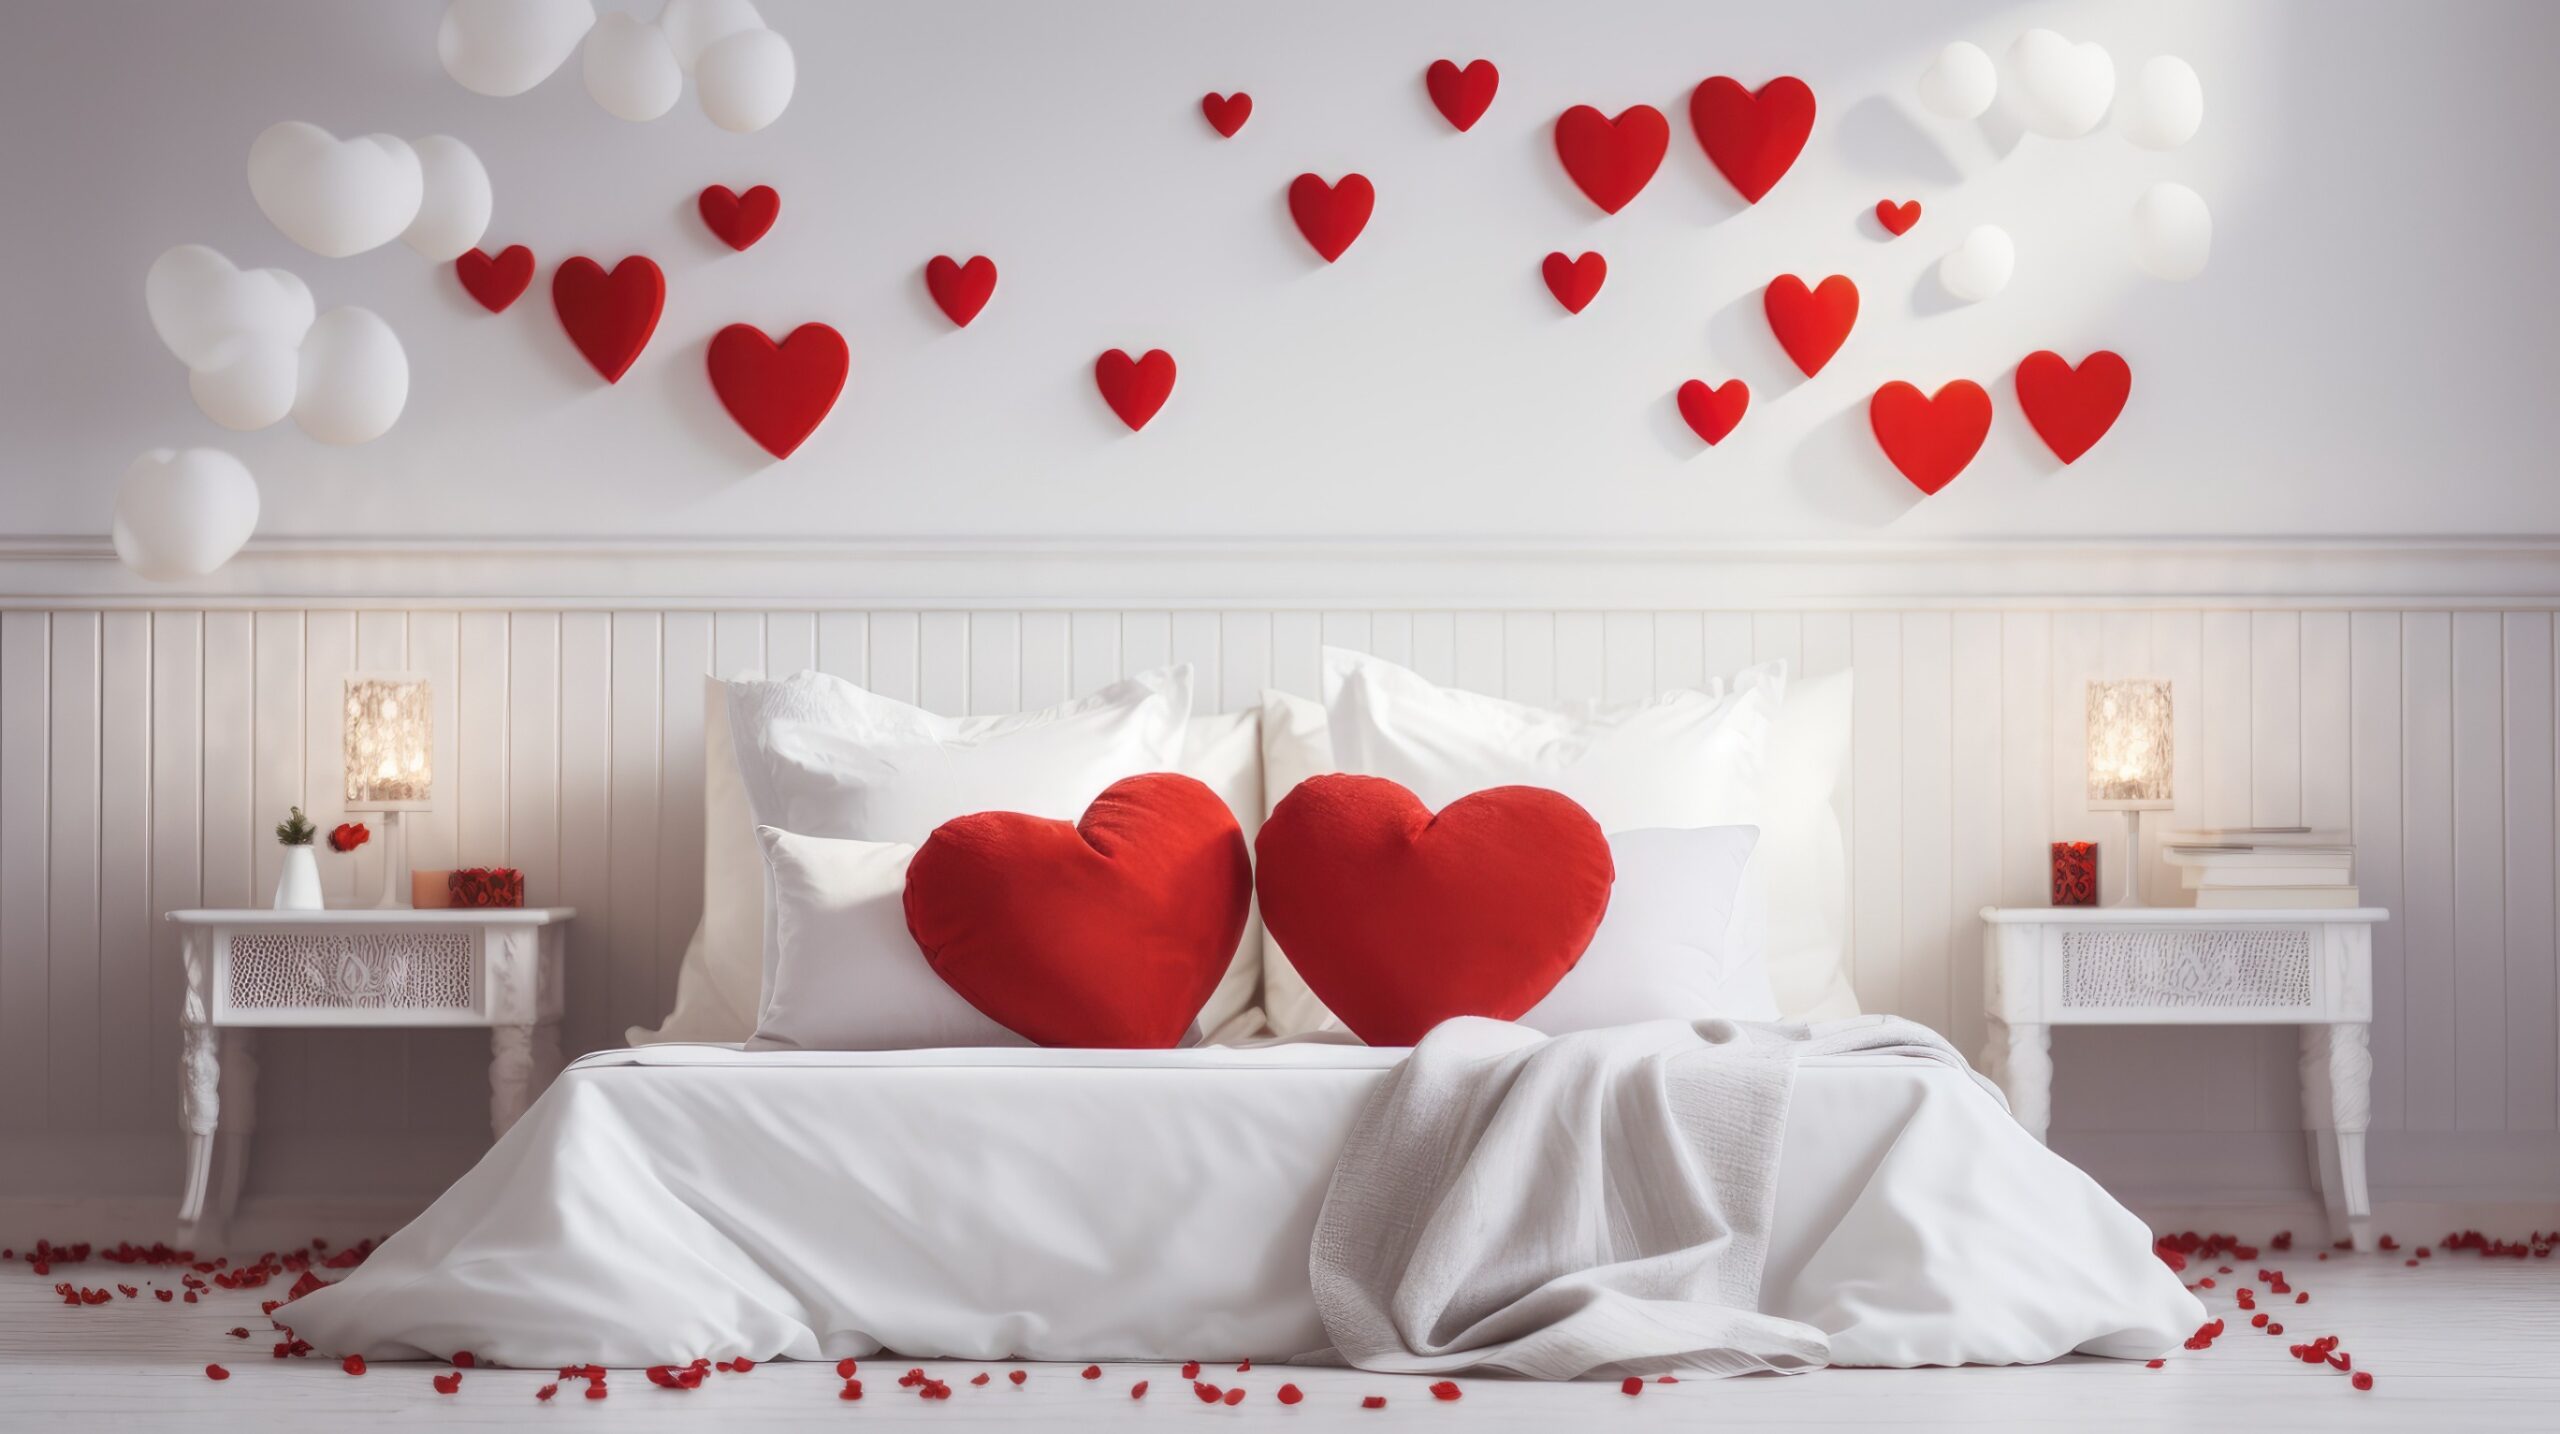 5 Valentine's Day Love Nest Ideas For Couples Moving In Together